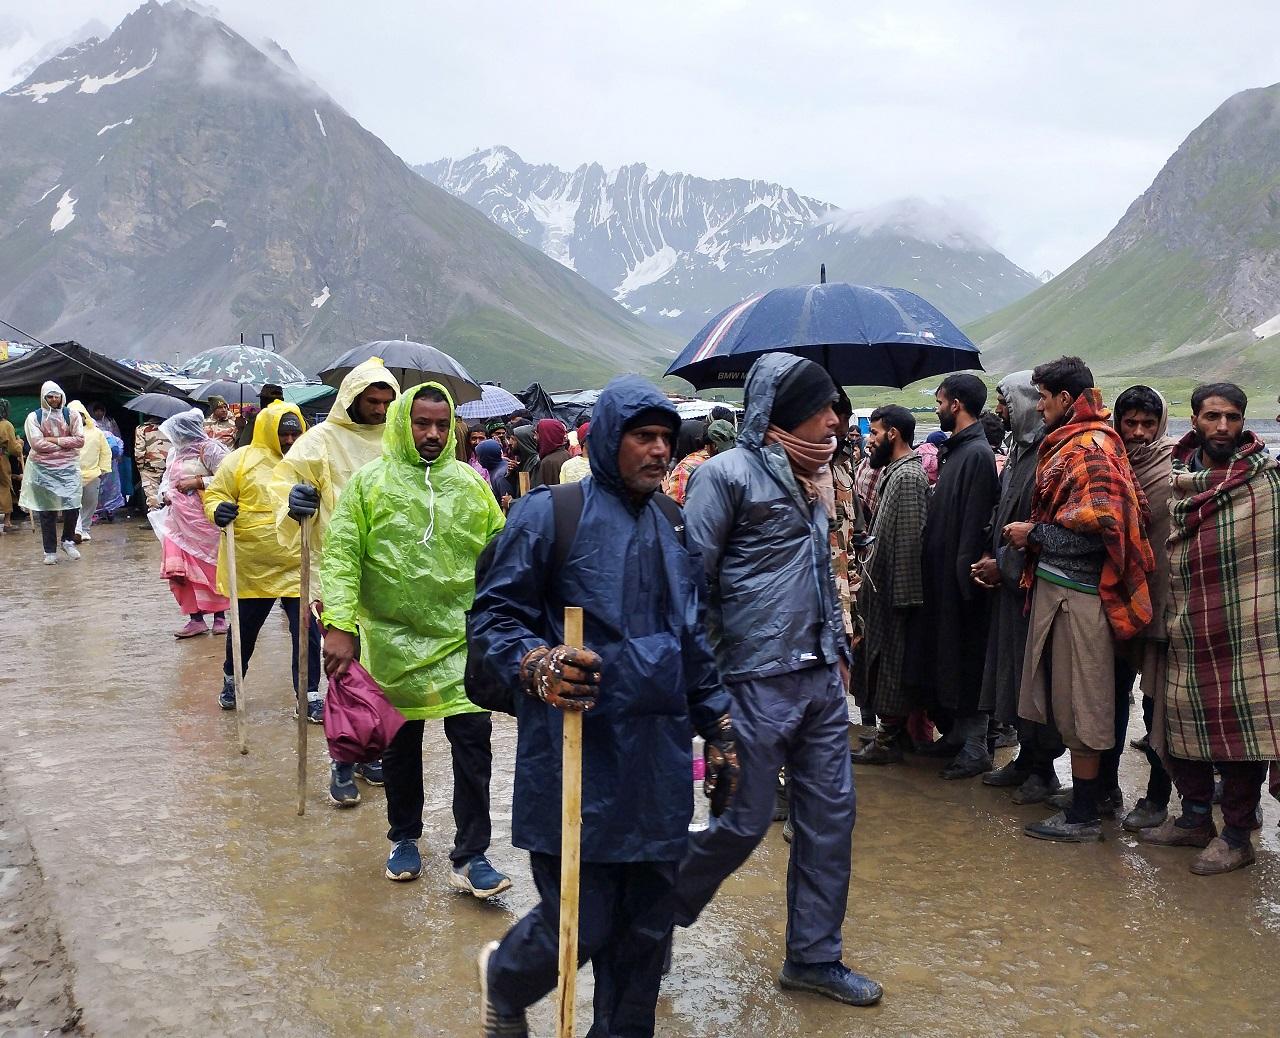 Over 3.85 lakh pilgrims have so far paid their obeisance at the shrine since the beginning of the 62-day-long yatra on July 1